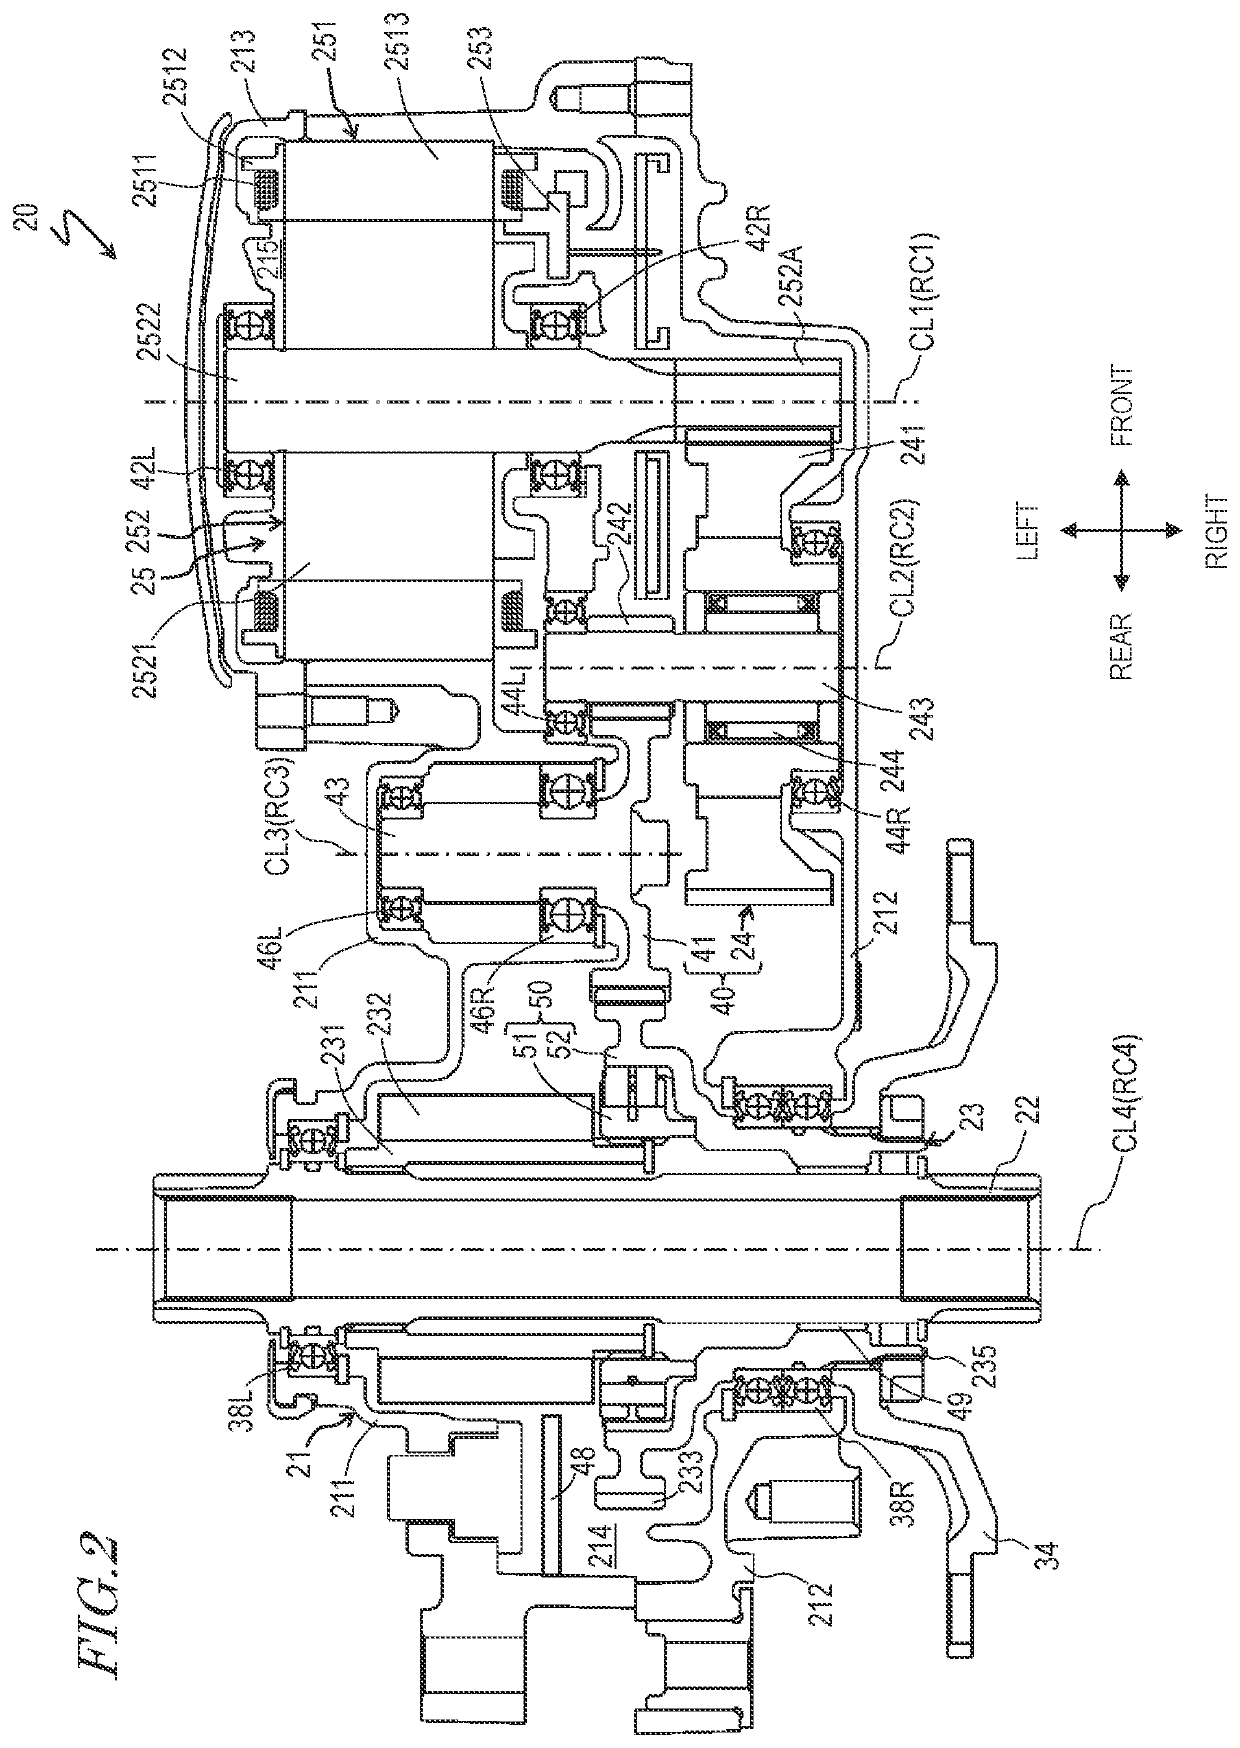 Drive unit and electrically assisted vehicle